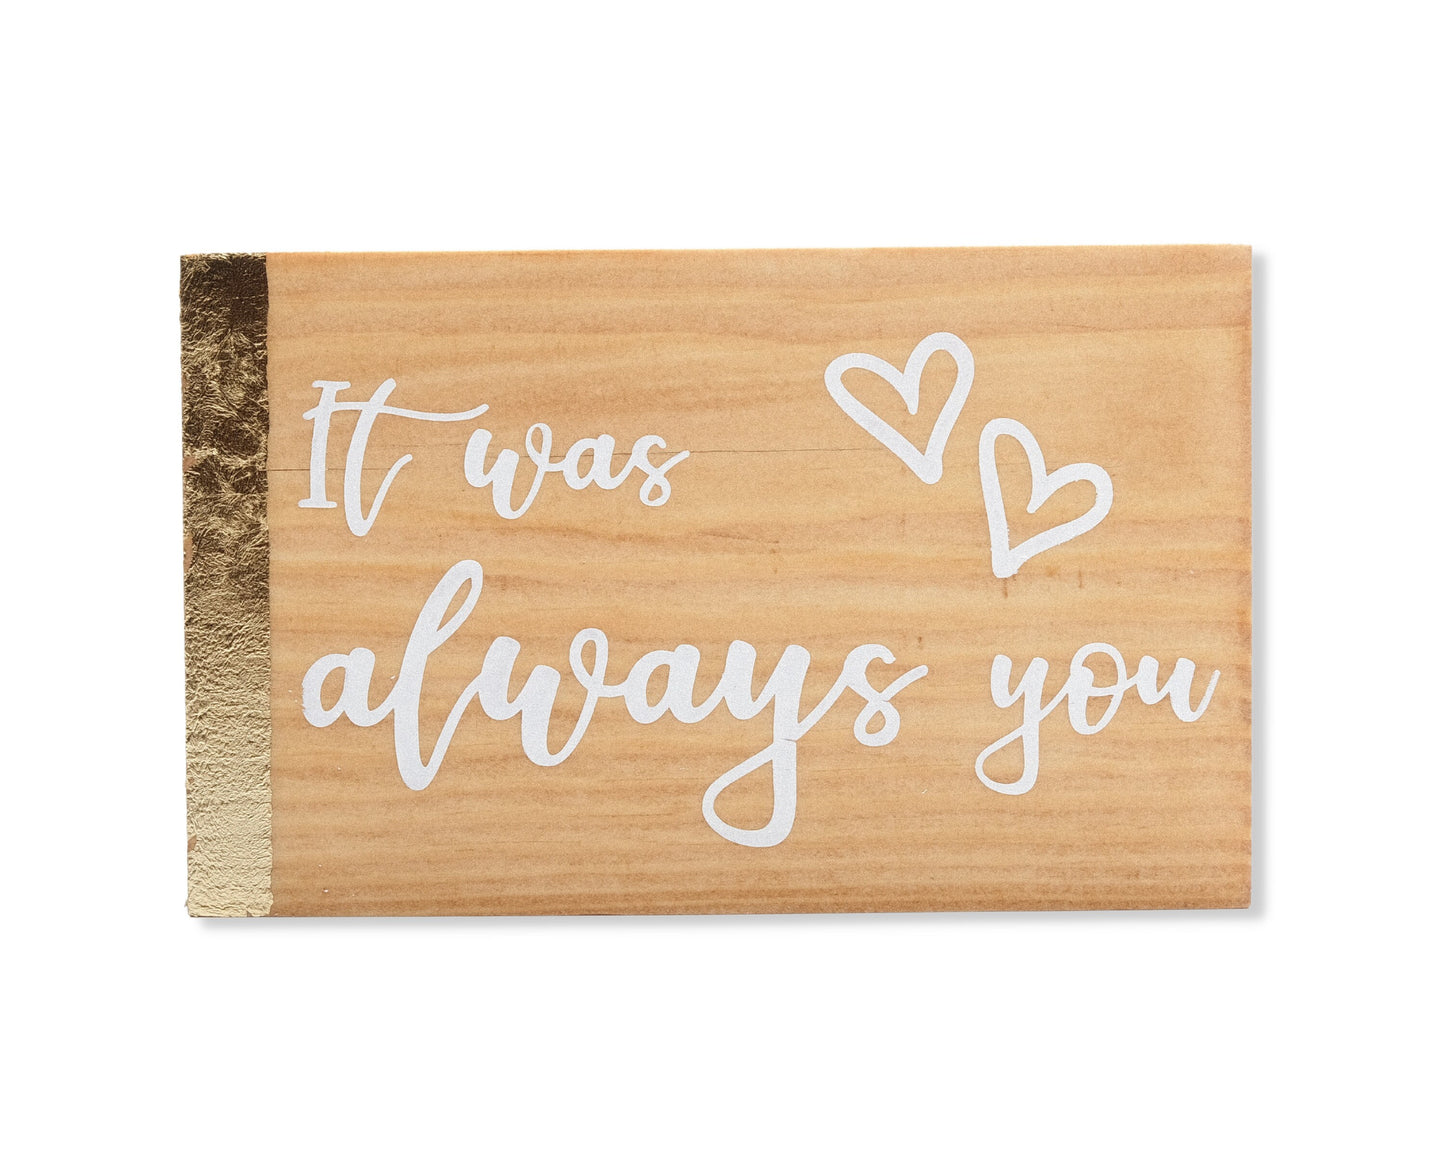 Small freestanding rectangular wooden sign facing straight on. Natural wood color, gold vertical border on left side only. White painted message, It was always you, with two heart outlines top right corner. Studio style photo on white background.